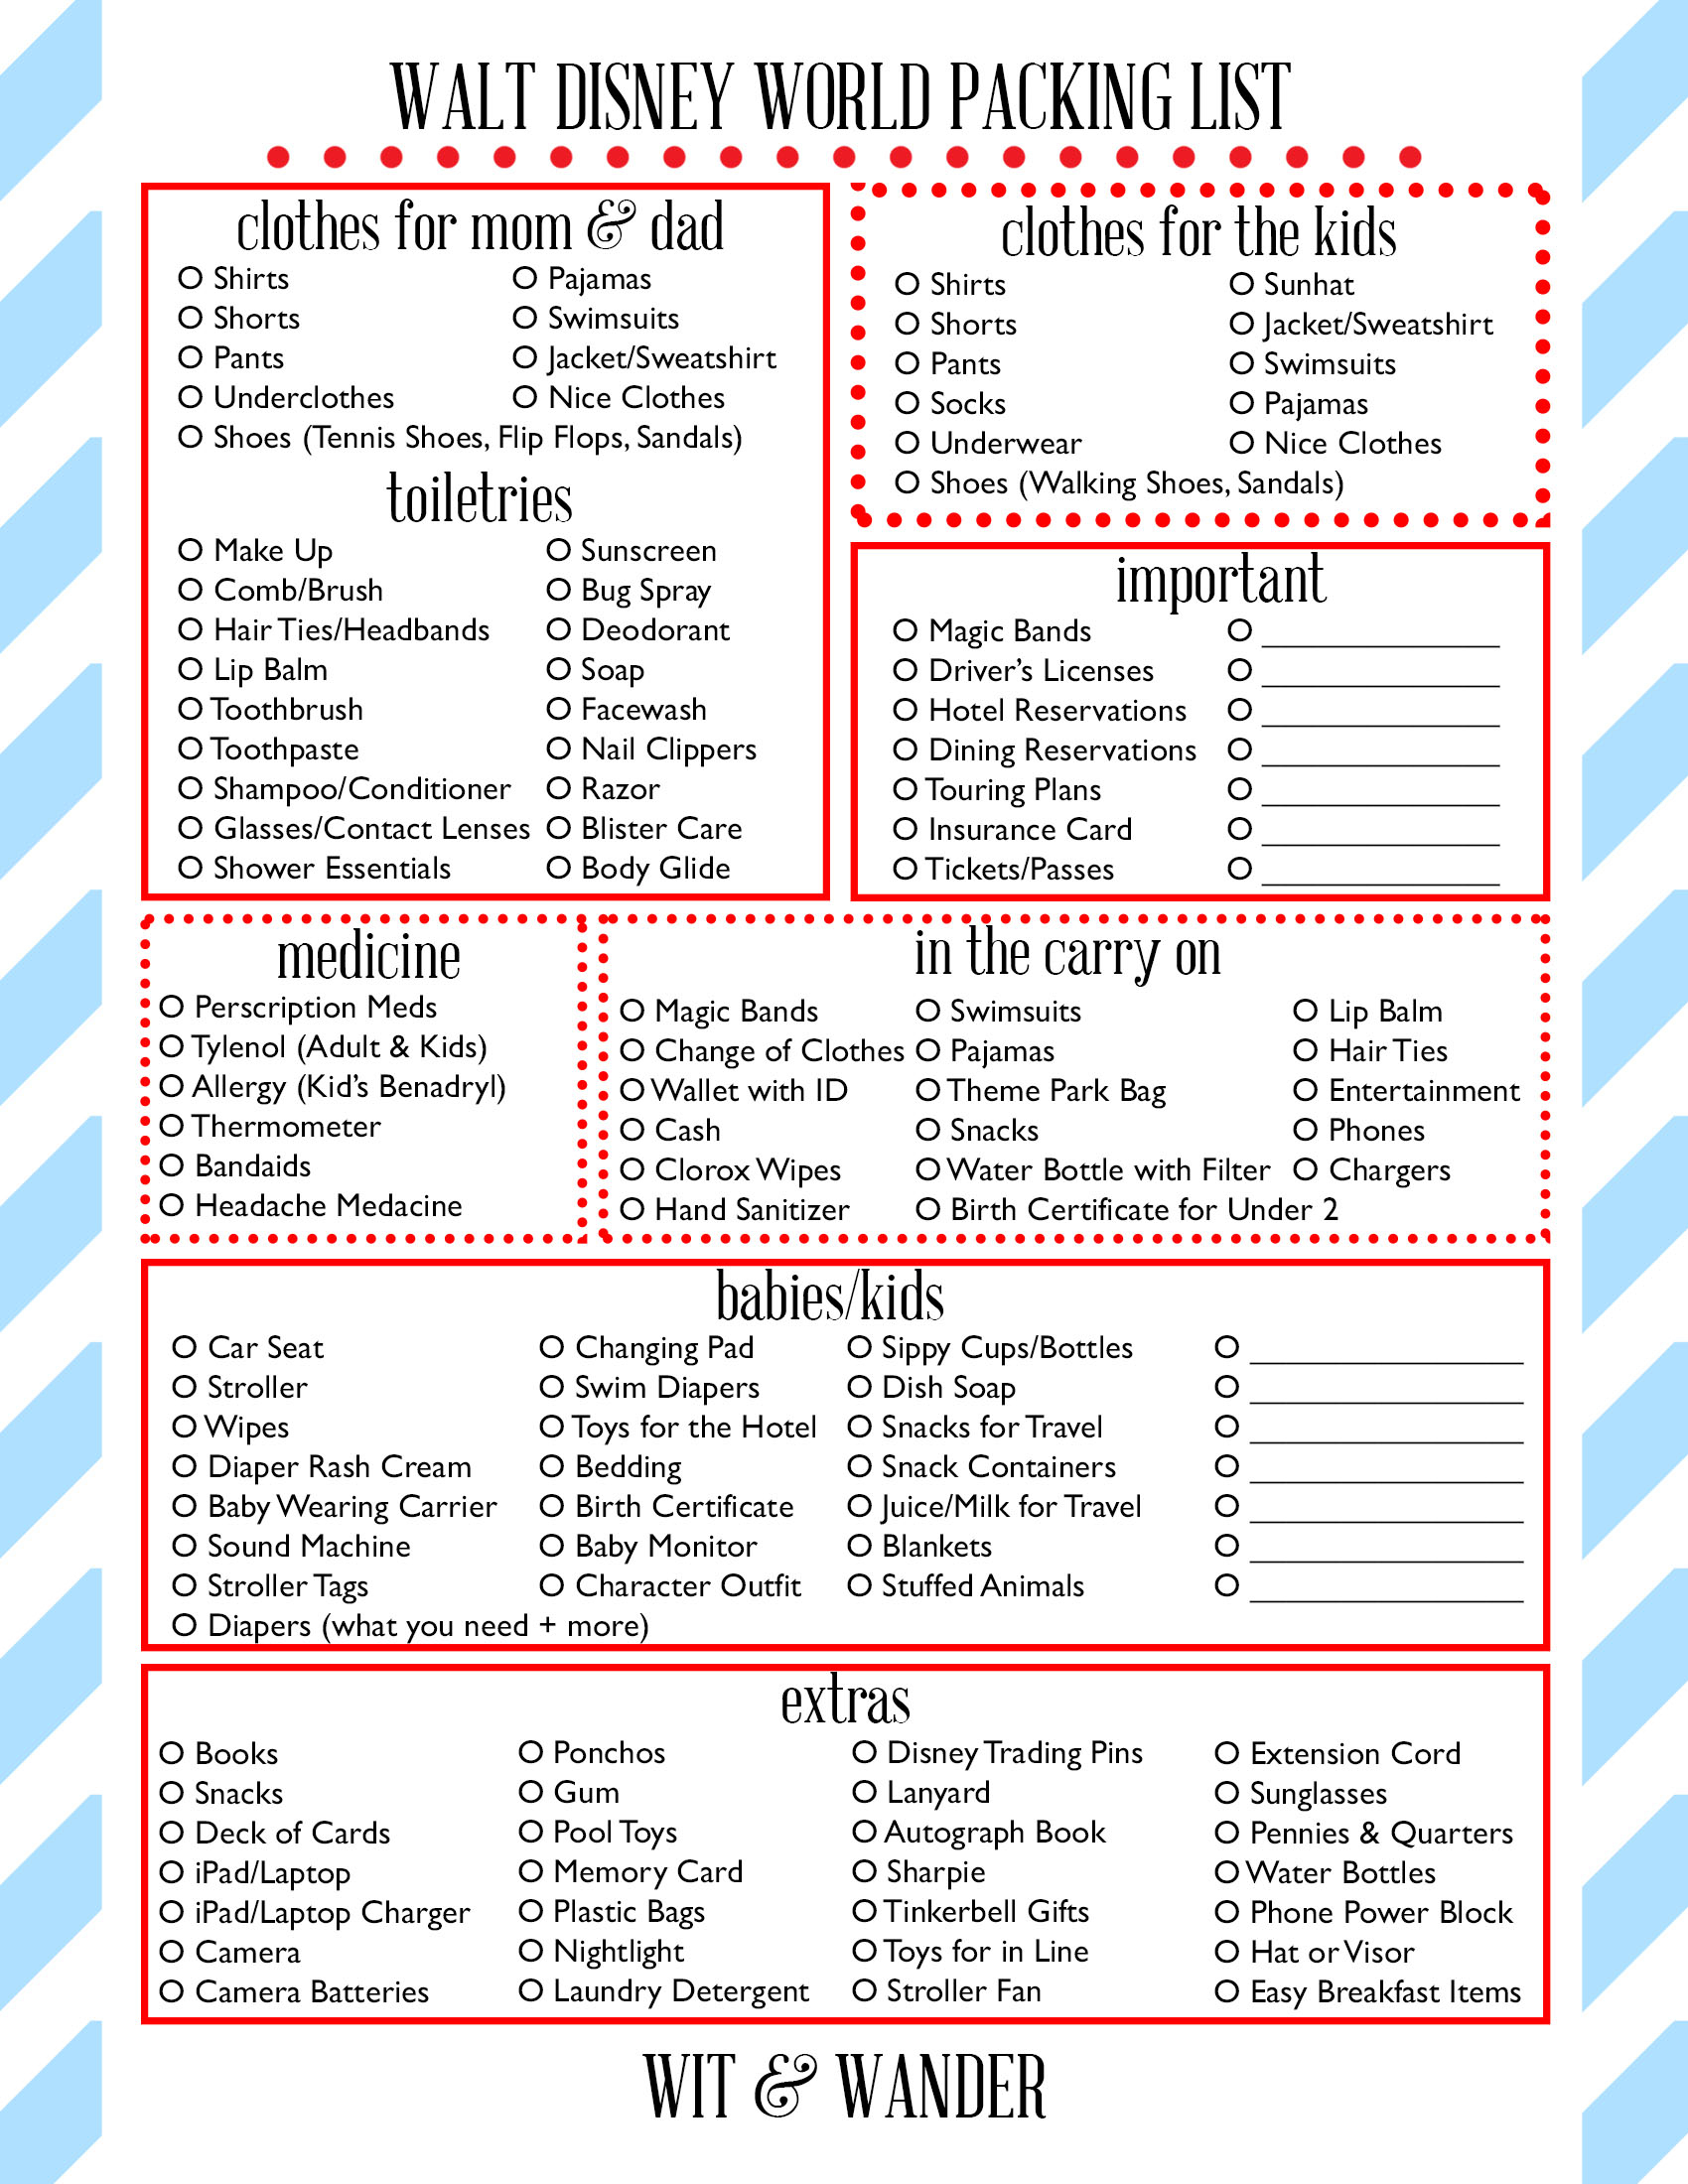 Walt Disney World Free Printables - Our Handcrafted Life